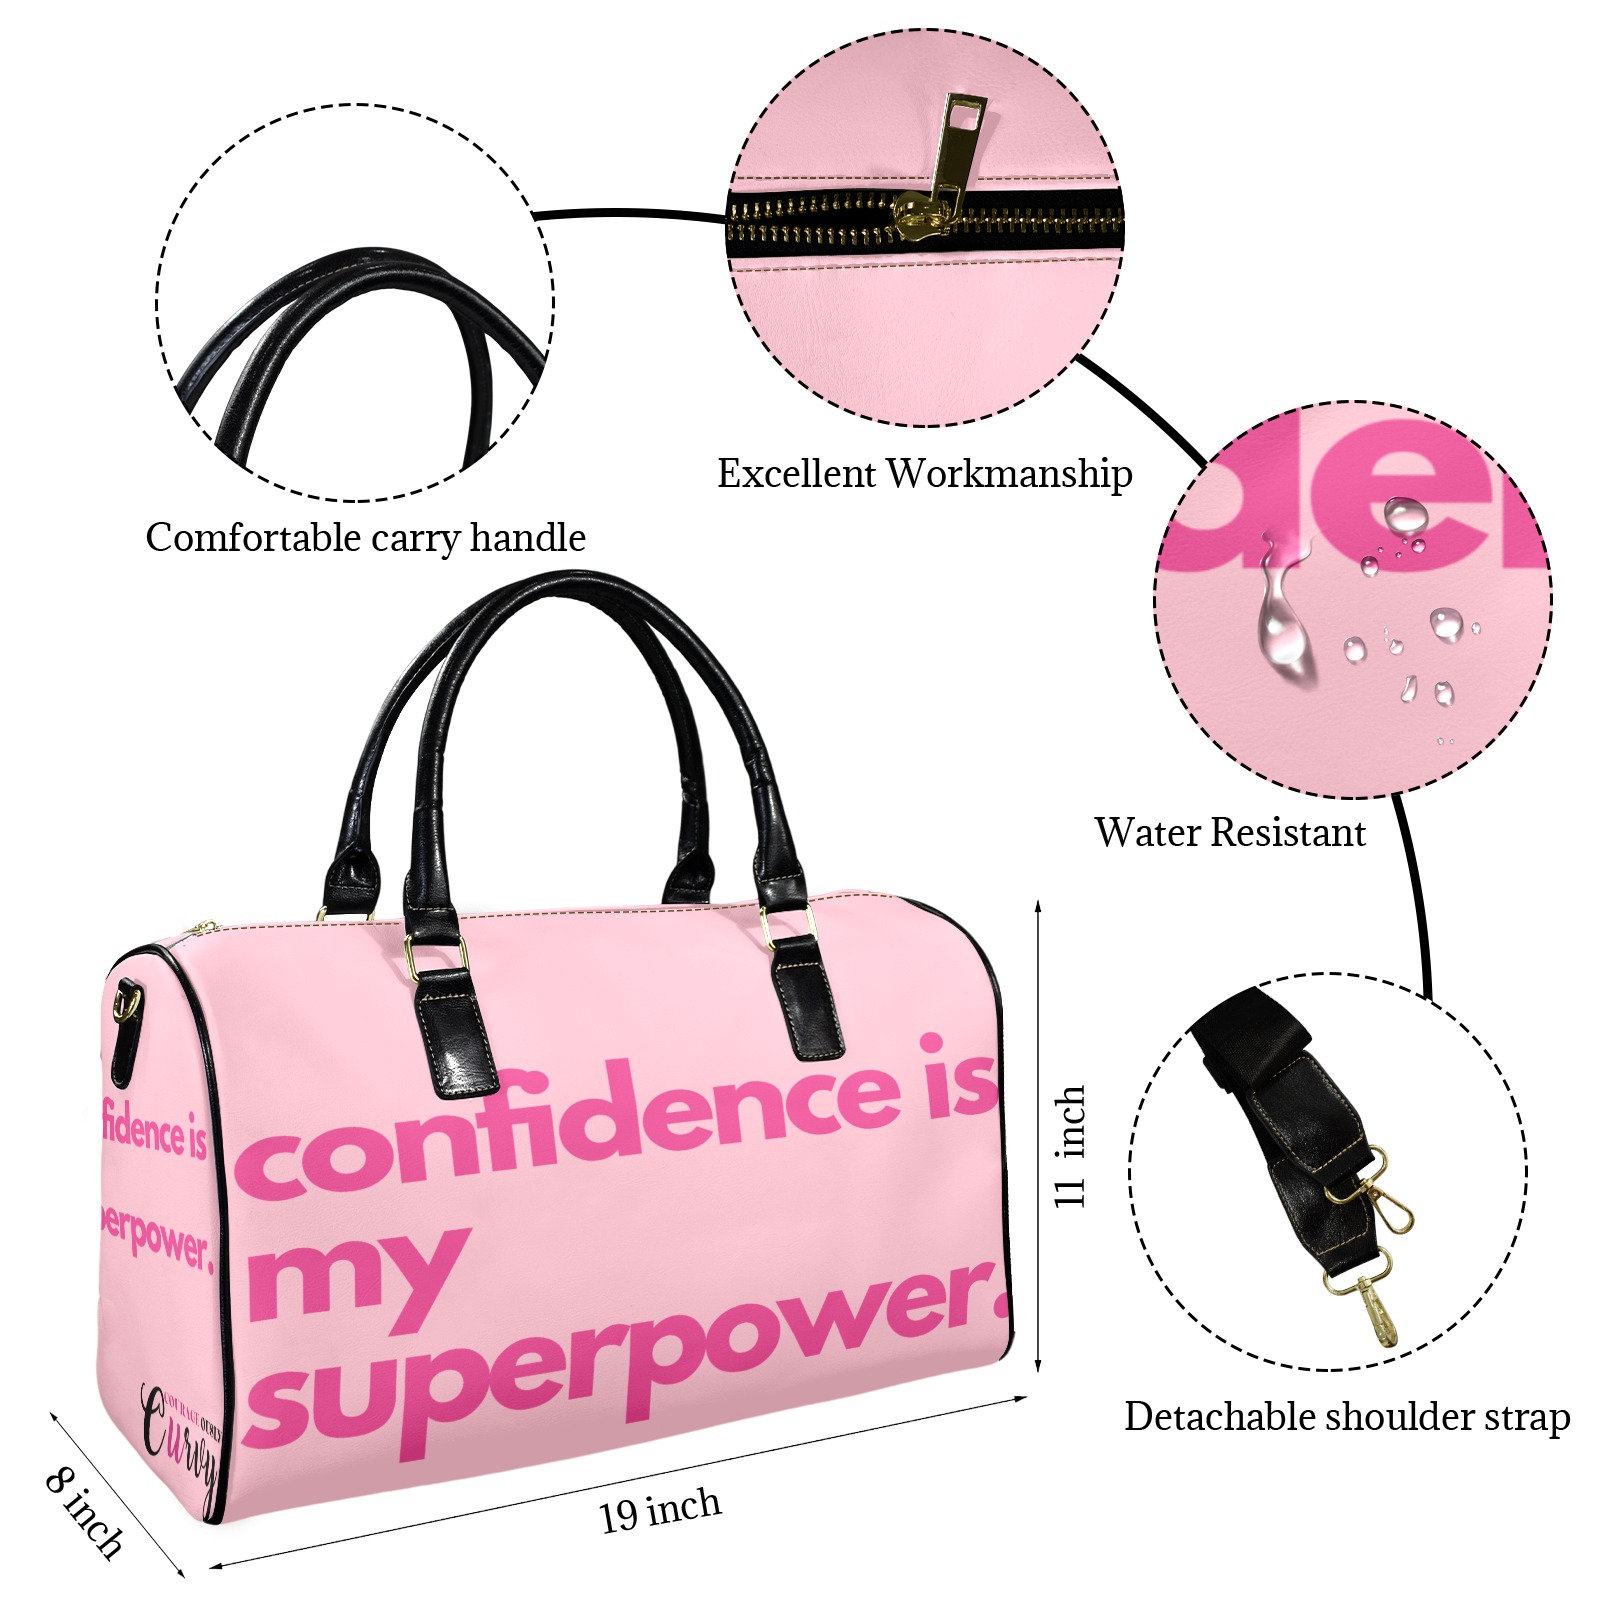 confidence is my superpower pink Leather Travel Bag-Small (Short Patch) (1735)